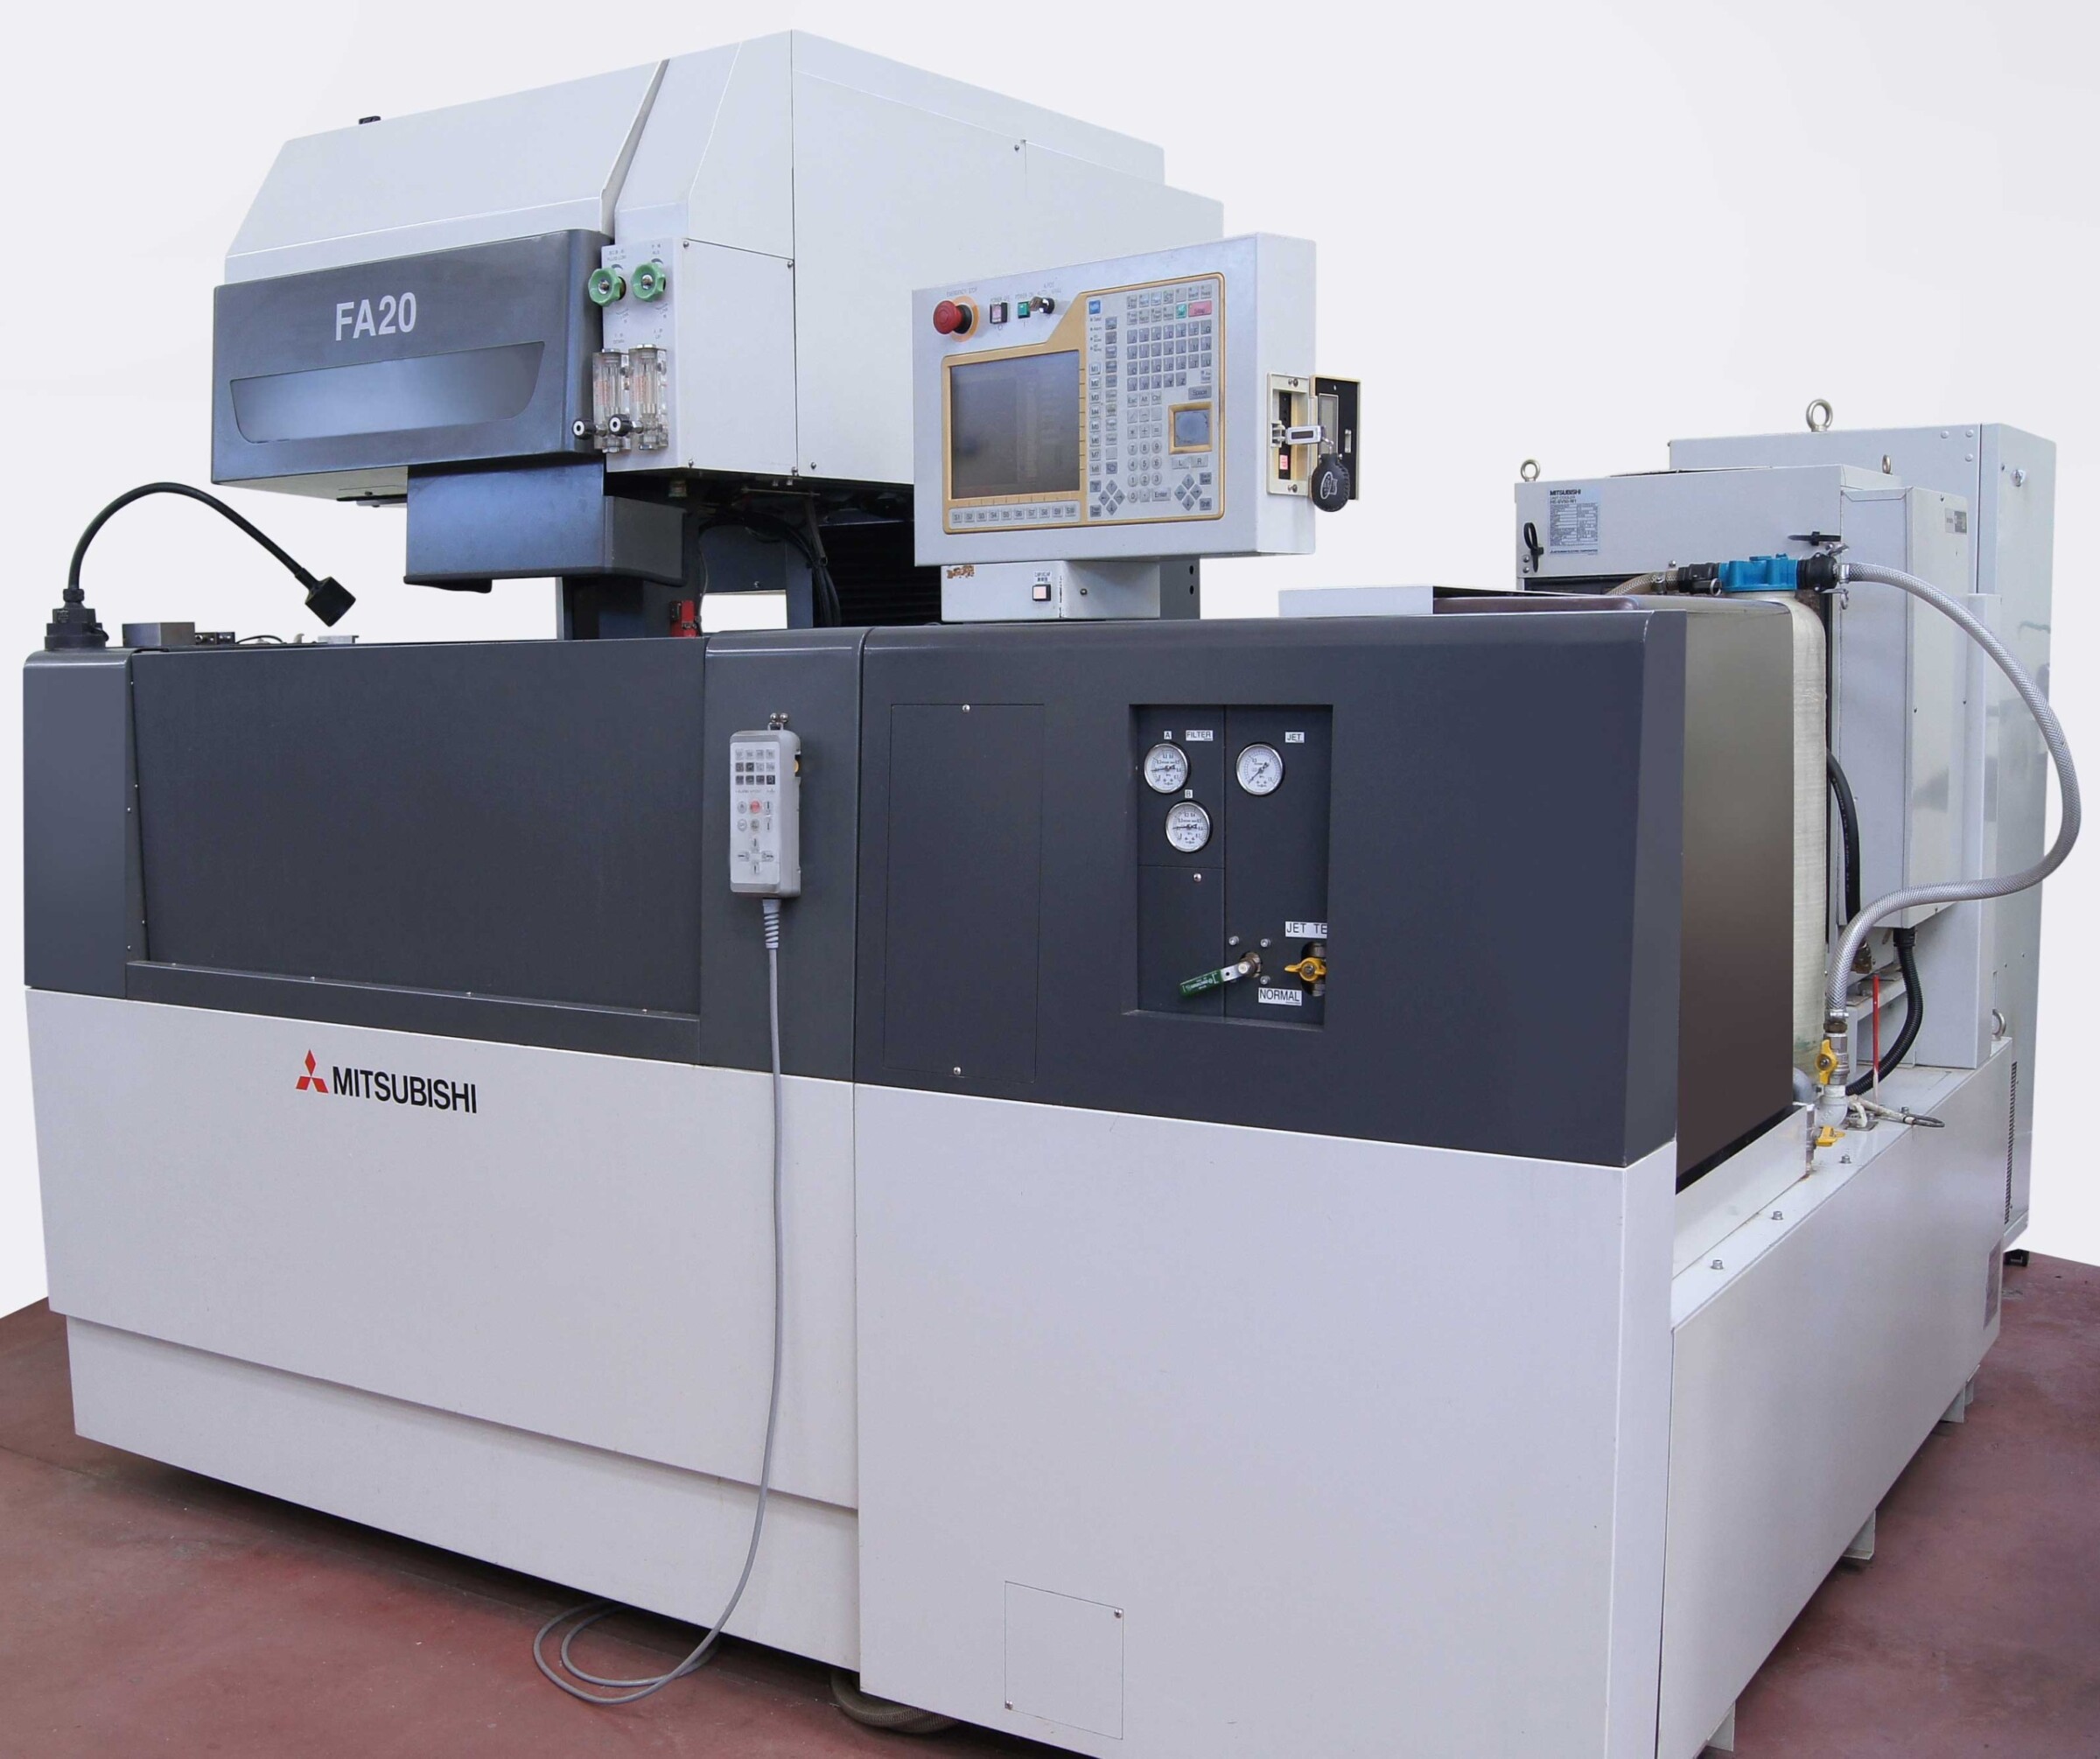 Sistmolding’s toolshop is notable for its EDM section with numerous wire-cutting and die-sinking machines from Mitsubishi Electric.